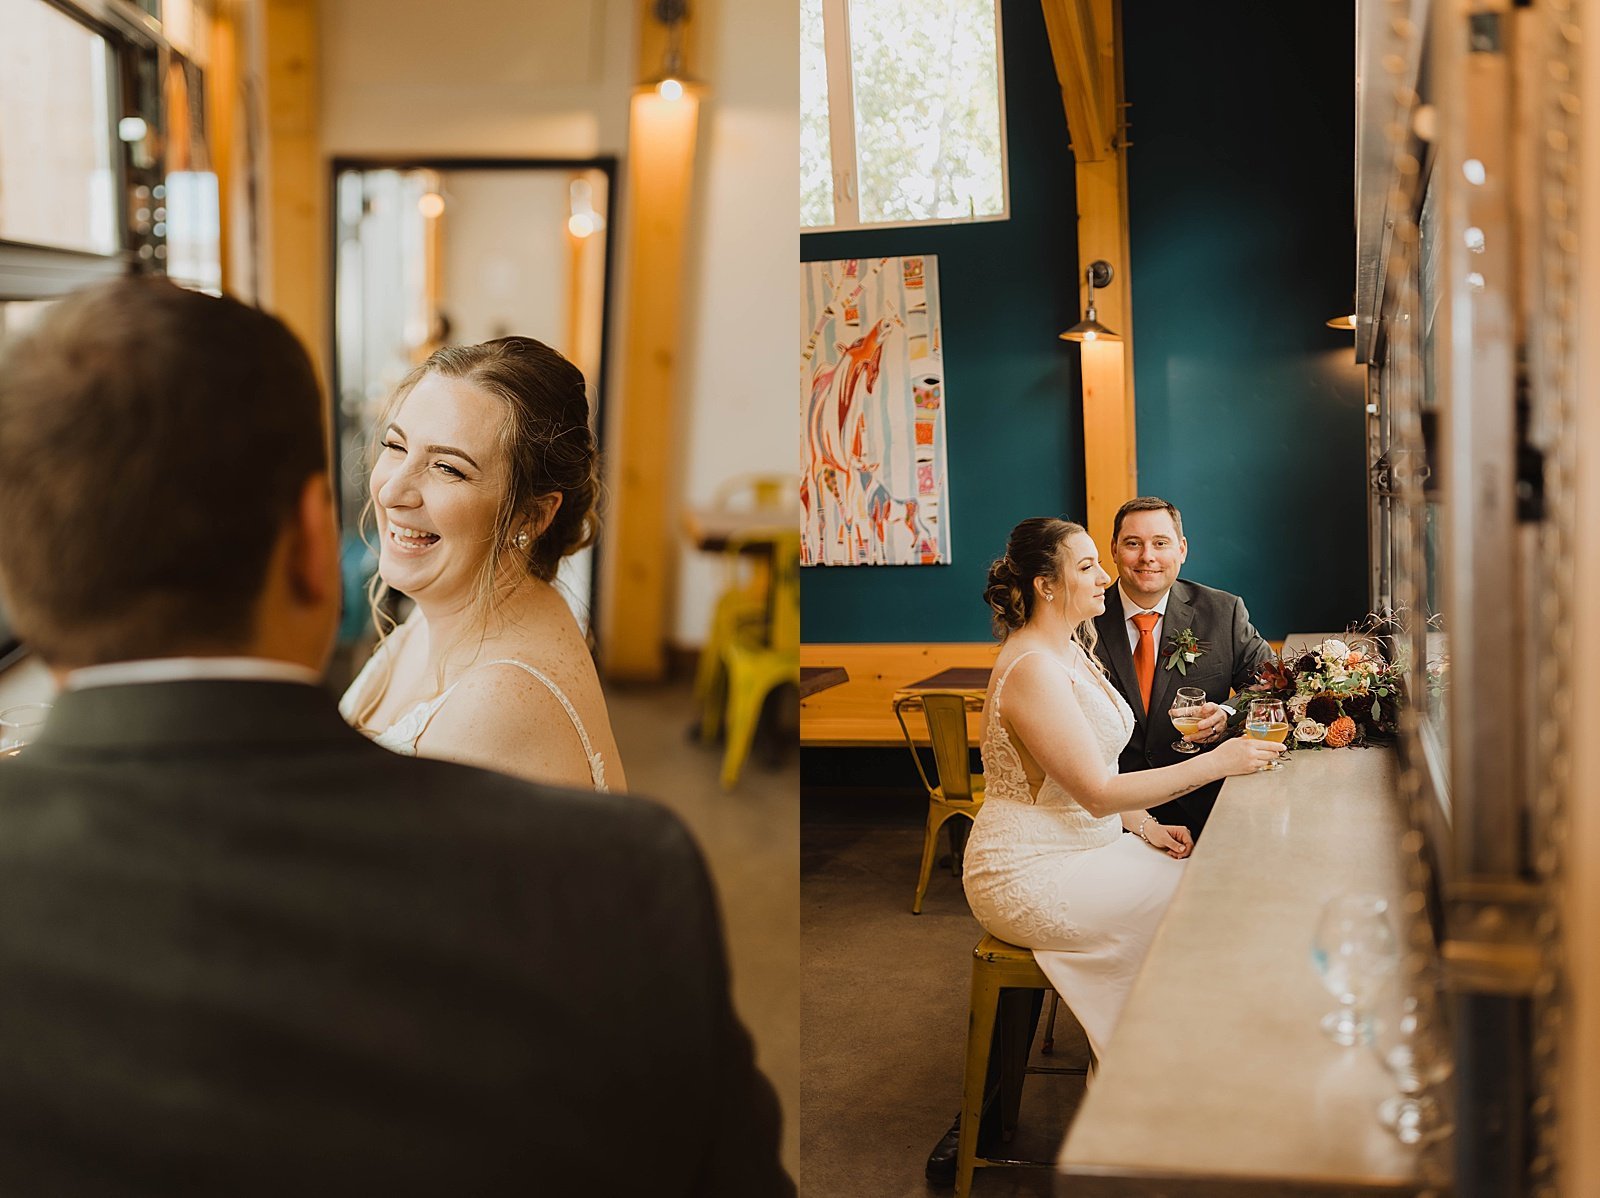  Newlyweds sharing a beer at a brewery by Theresa McDonald Photographer 